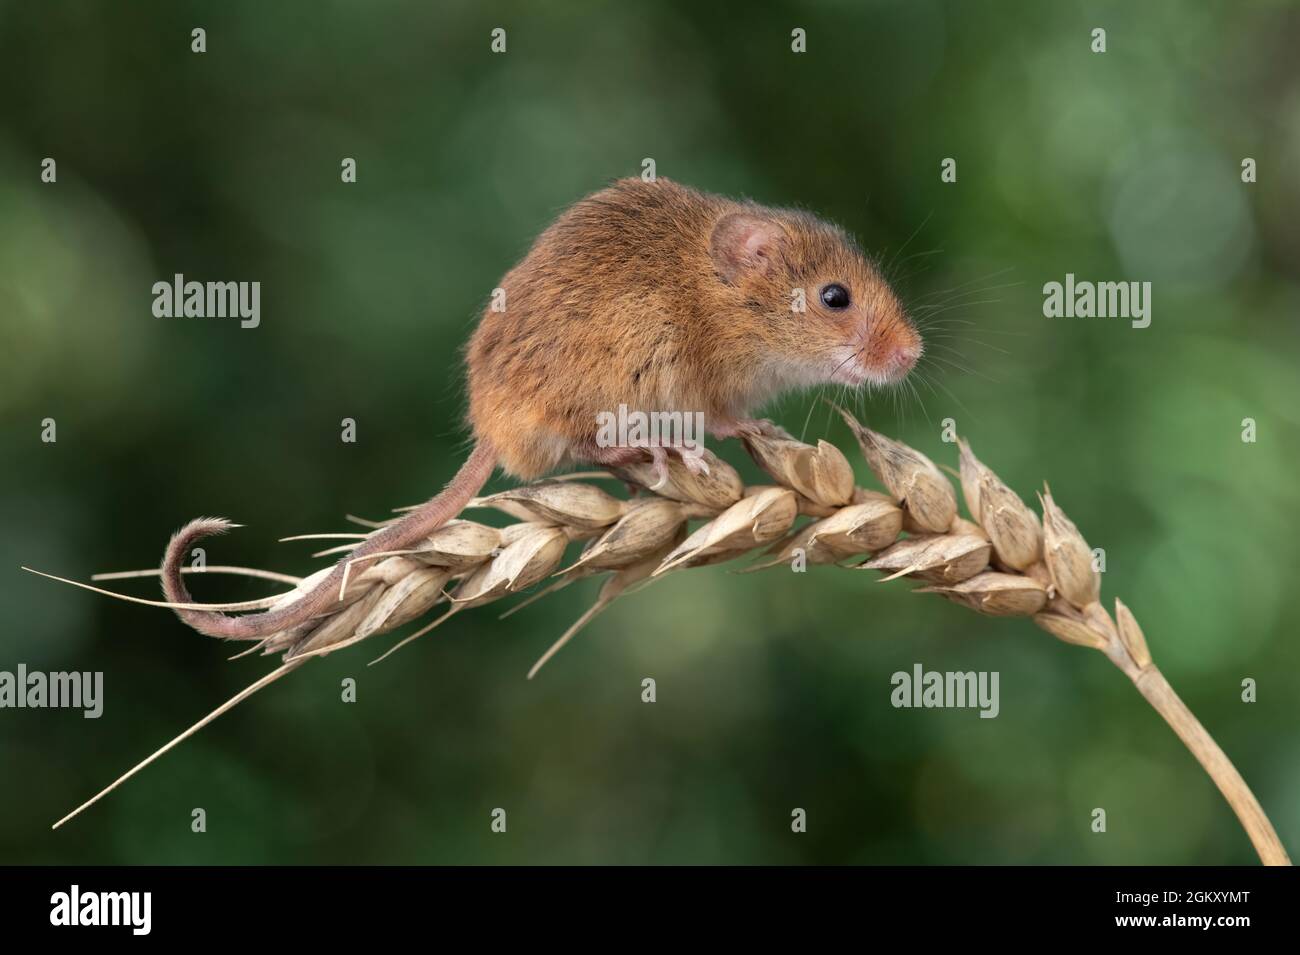 Harvest Mouse (Micromys minitus) on an ear of wheat Stock Photo